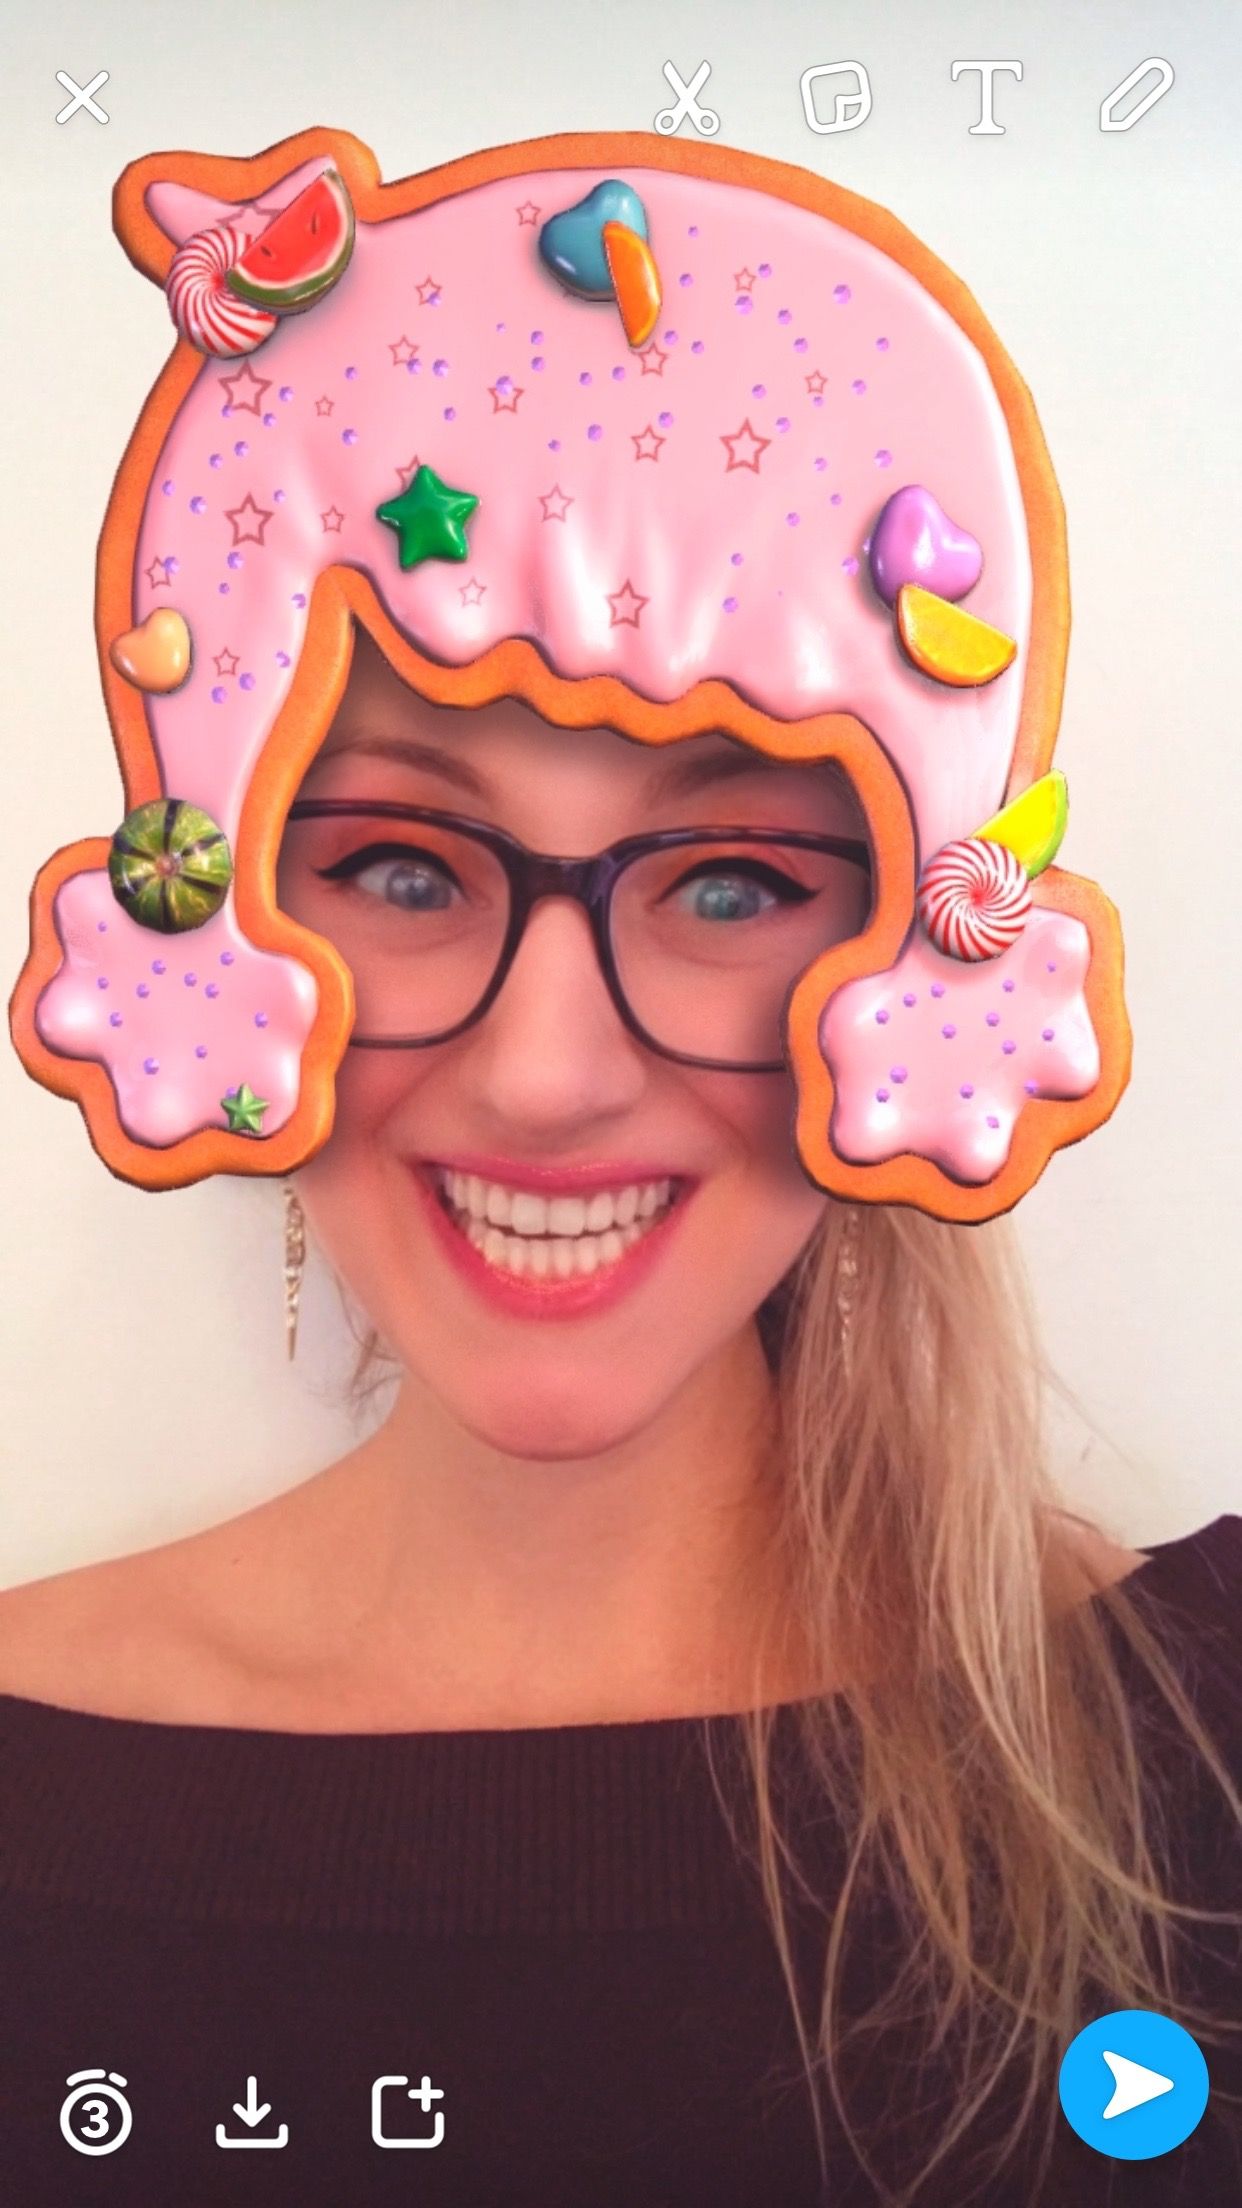 best snapchat filter for you, based on your zodiac sign